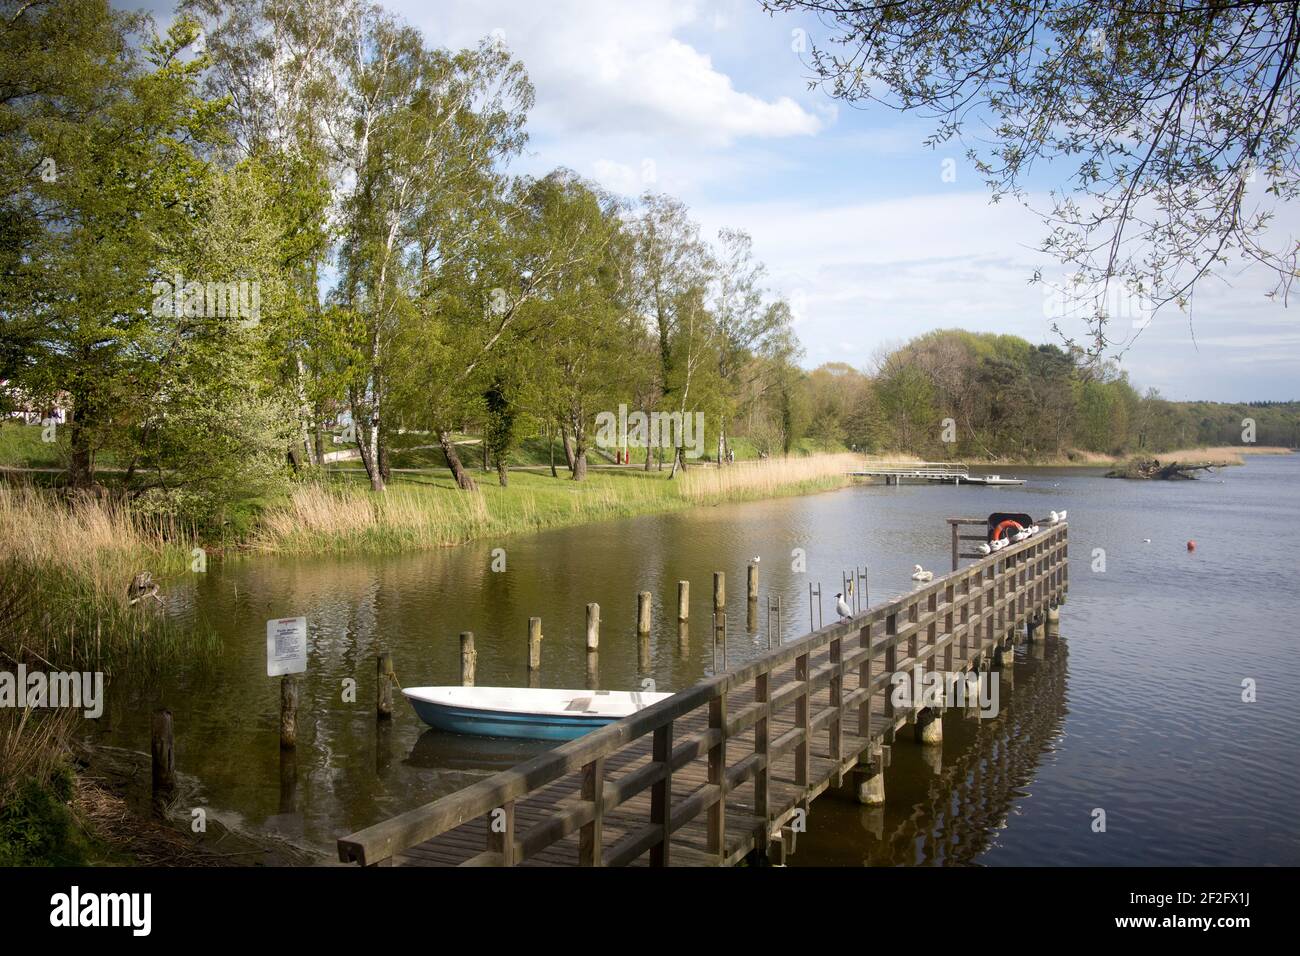 Koelpingsee, Loddin, Usedom Banque D'Images